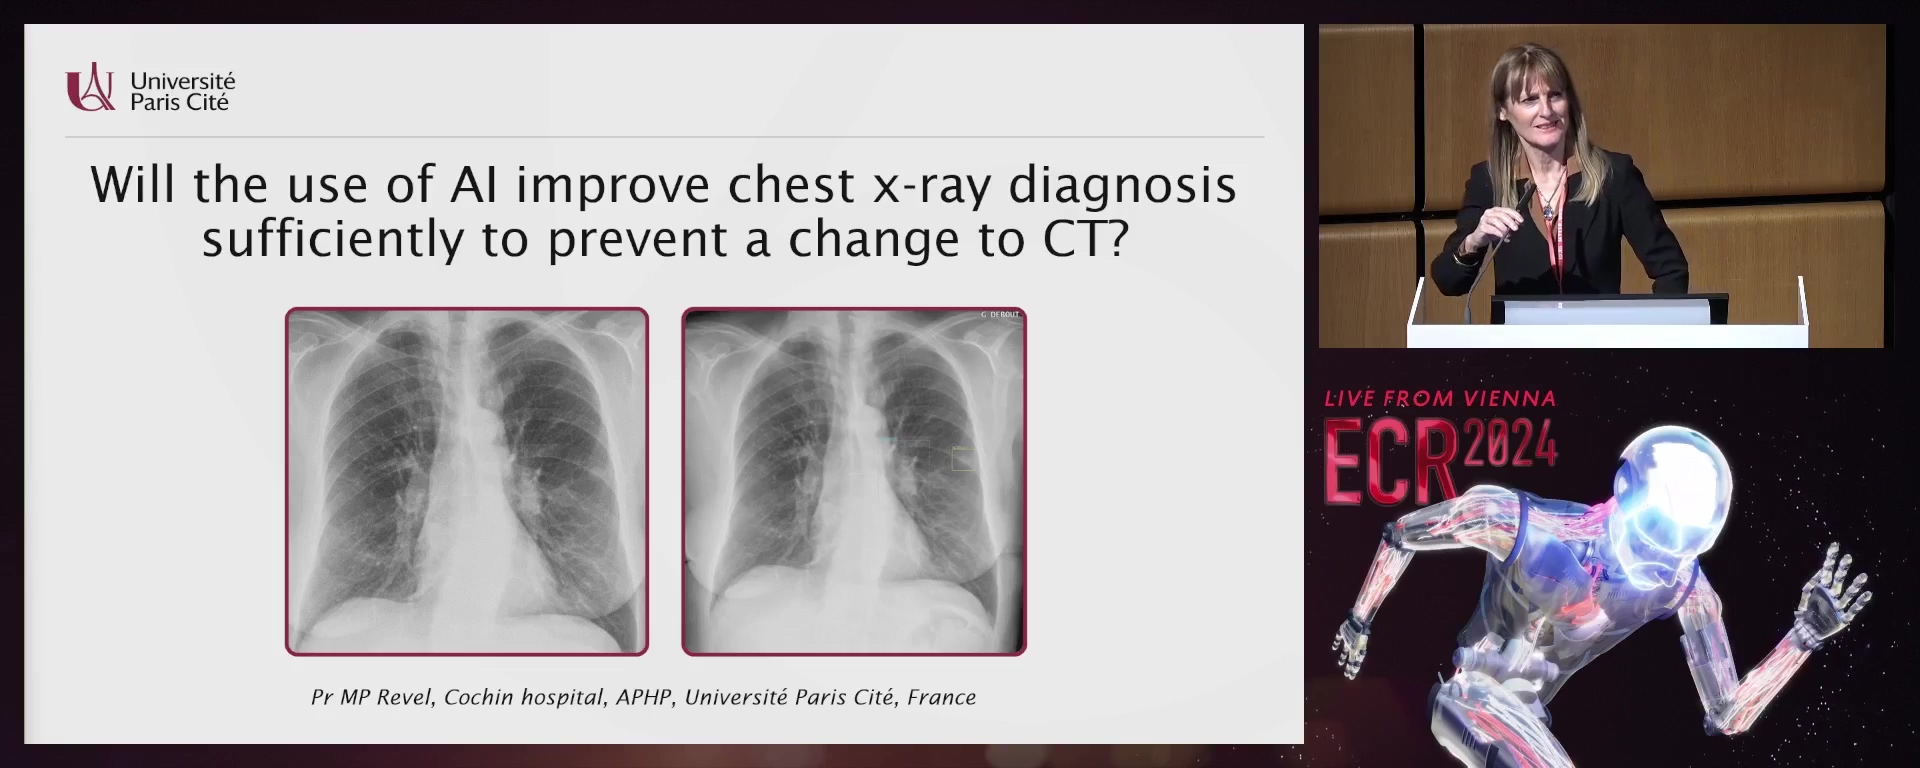 Will the use of AI improve chest x-ray diagnosis sufficiently to prevent a change to CT?